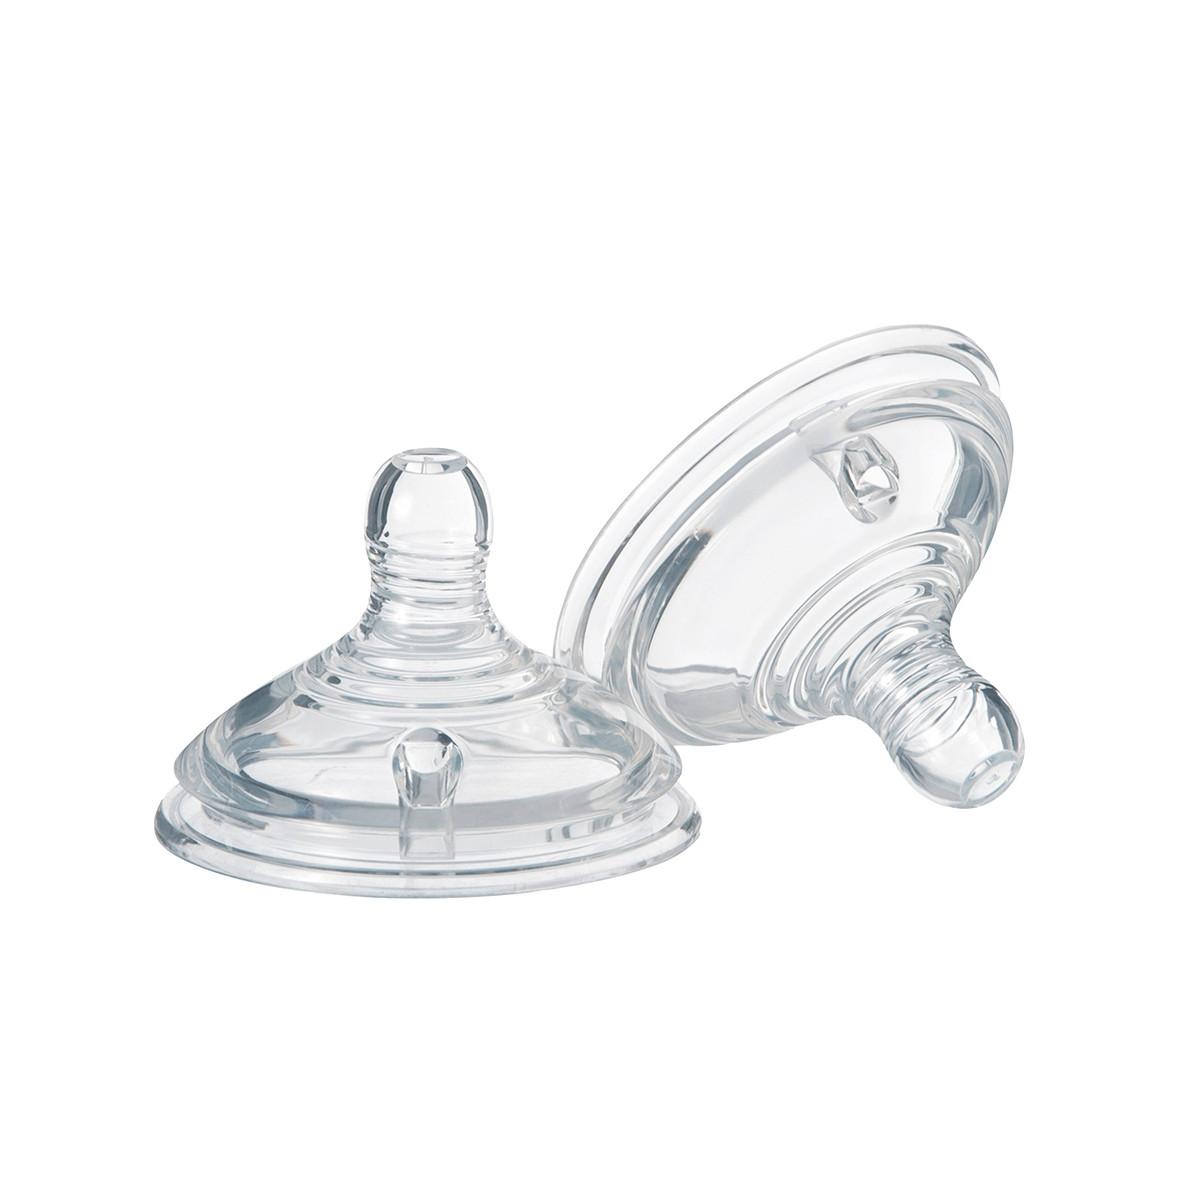 Selected image for TOMMEE TIPPEE Varijabilna cucla 421226 2/1